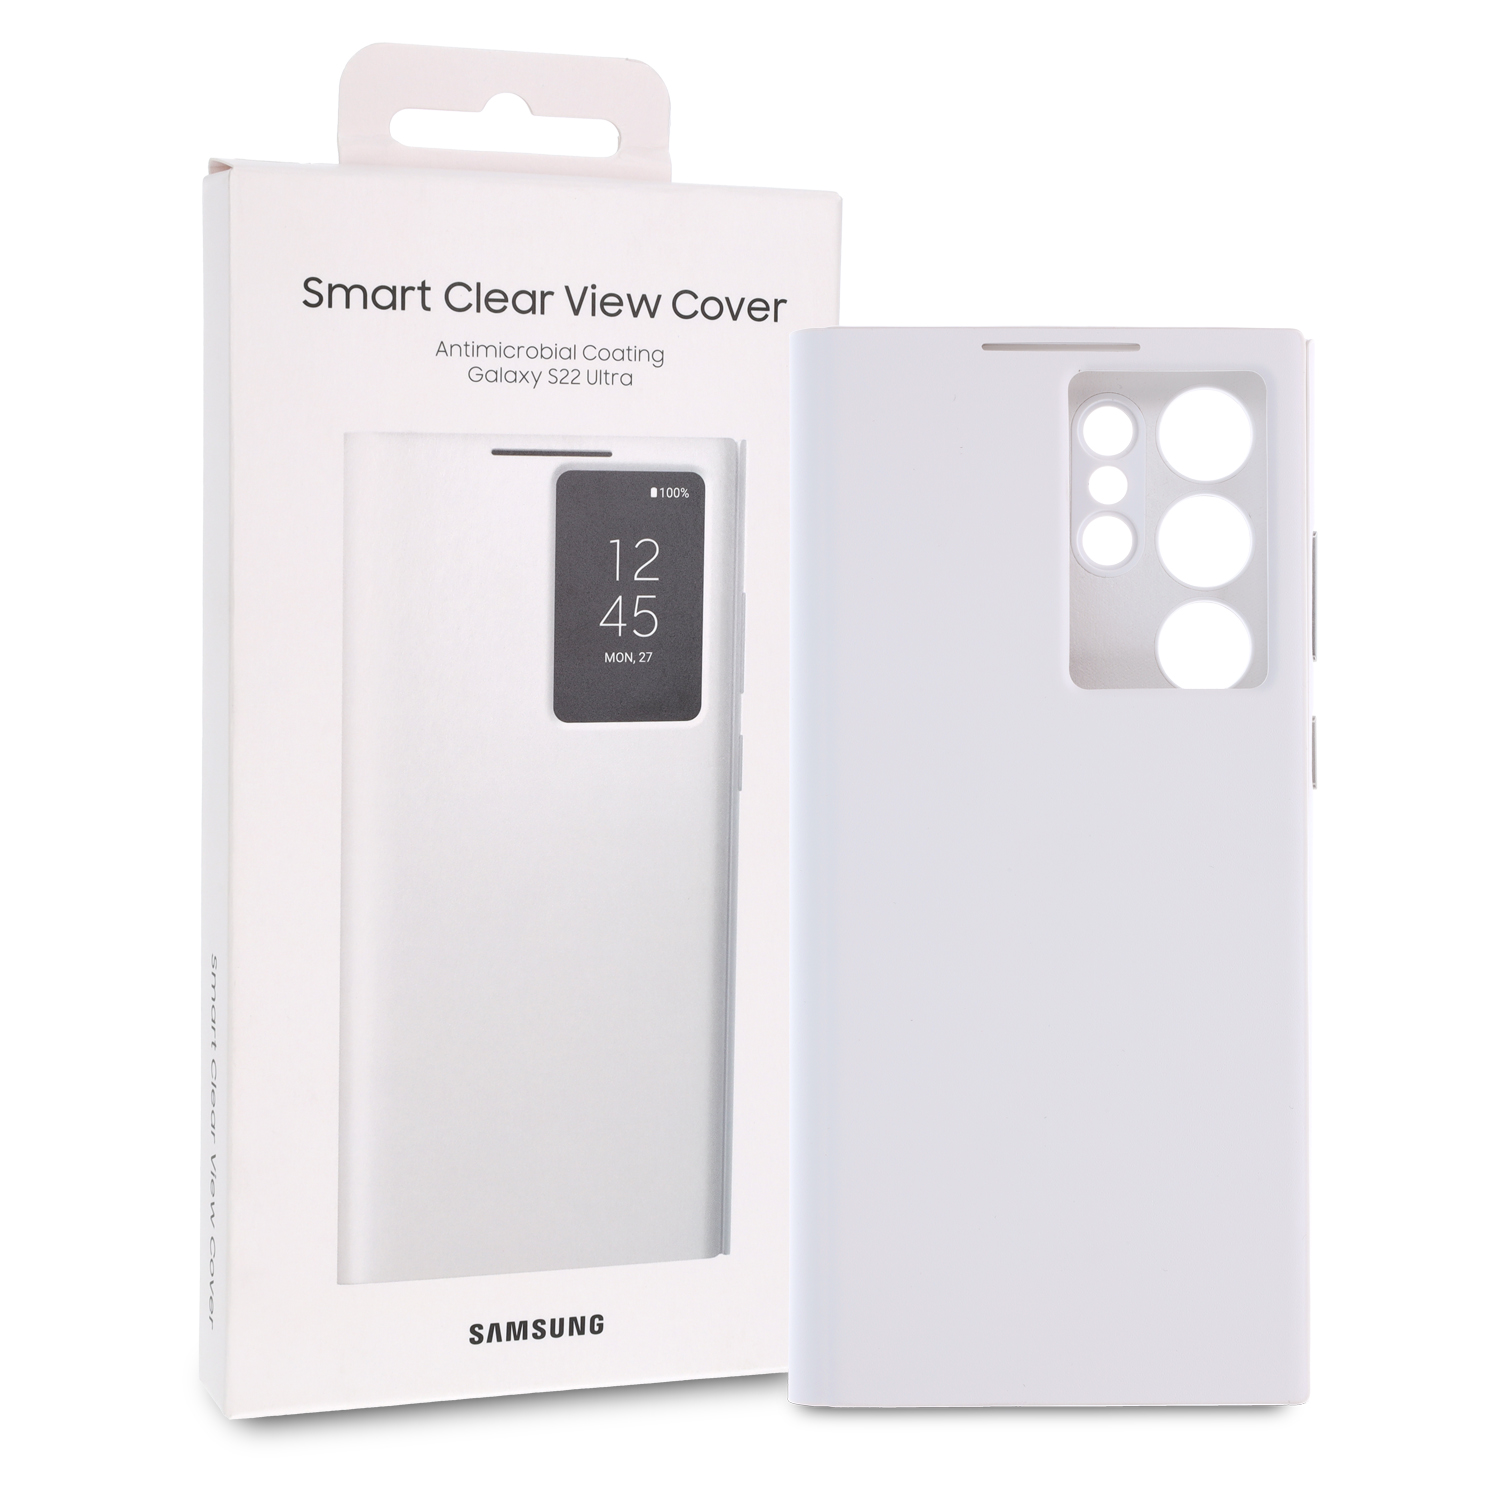 Samsung Galaxy S22 Ultra (S908B/DS) Smart Clear View Cover EF-ZS908CWEGEE Weiß